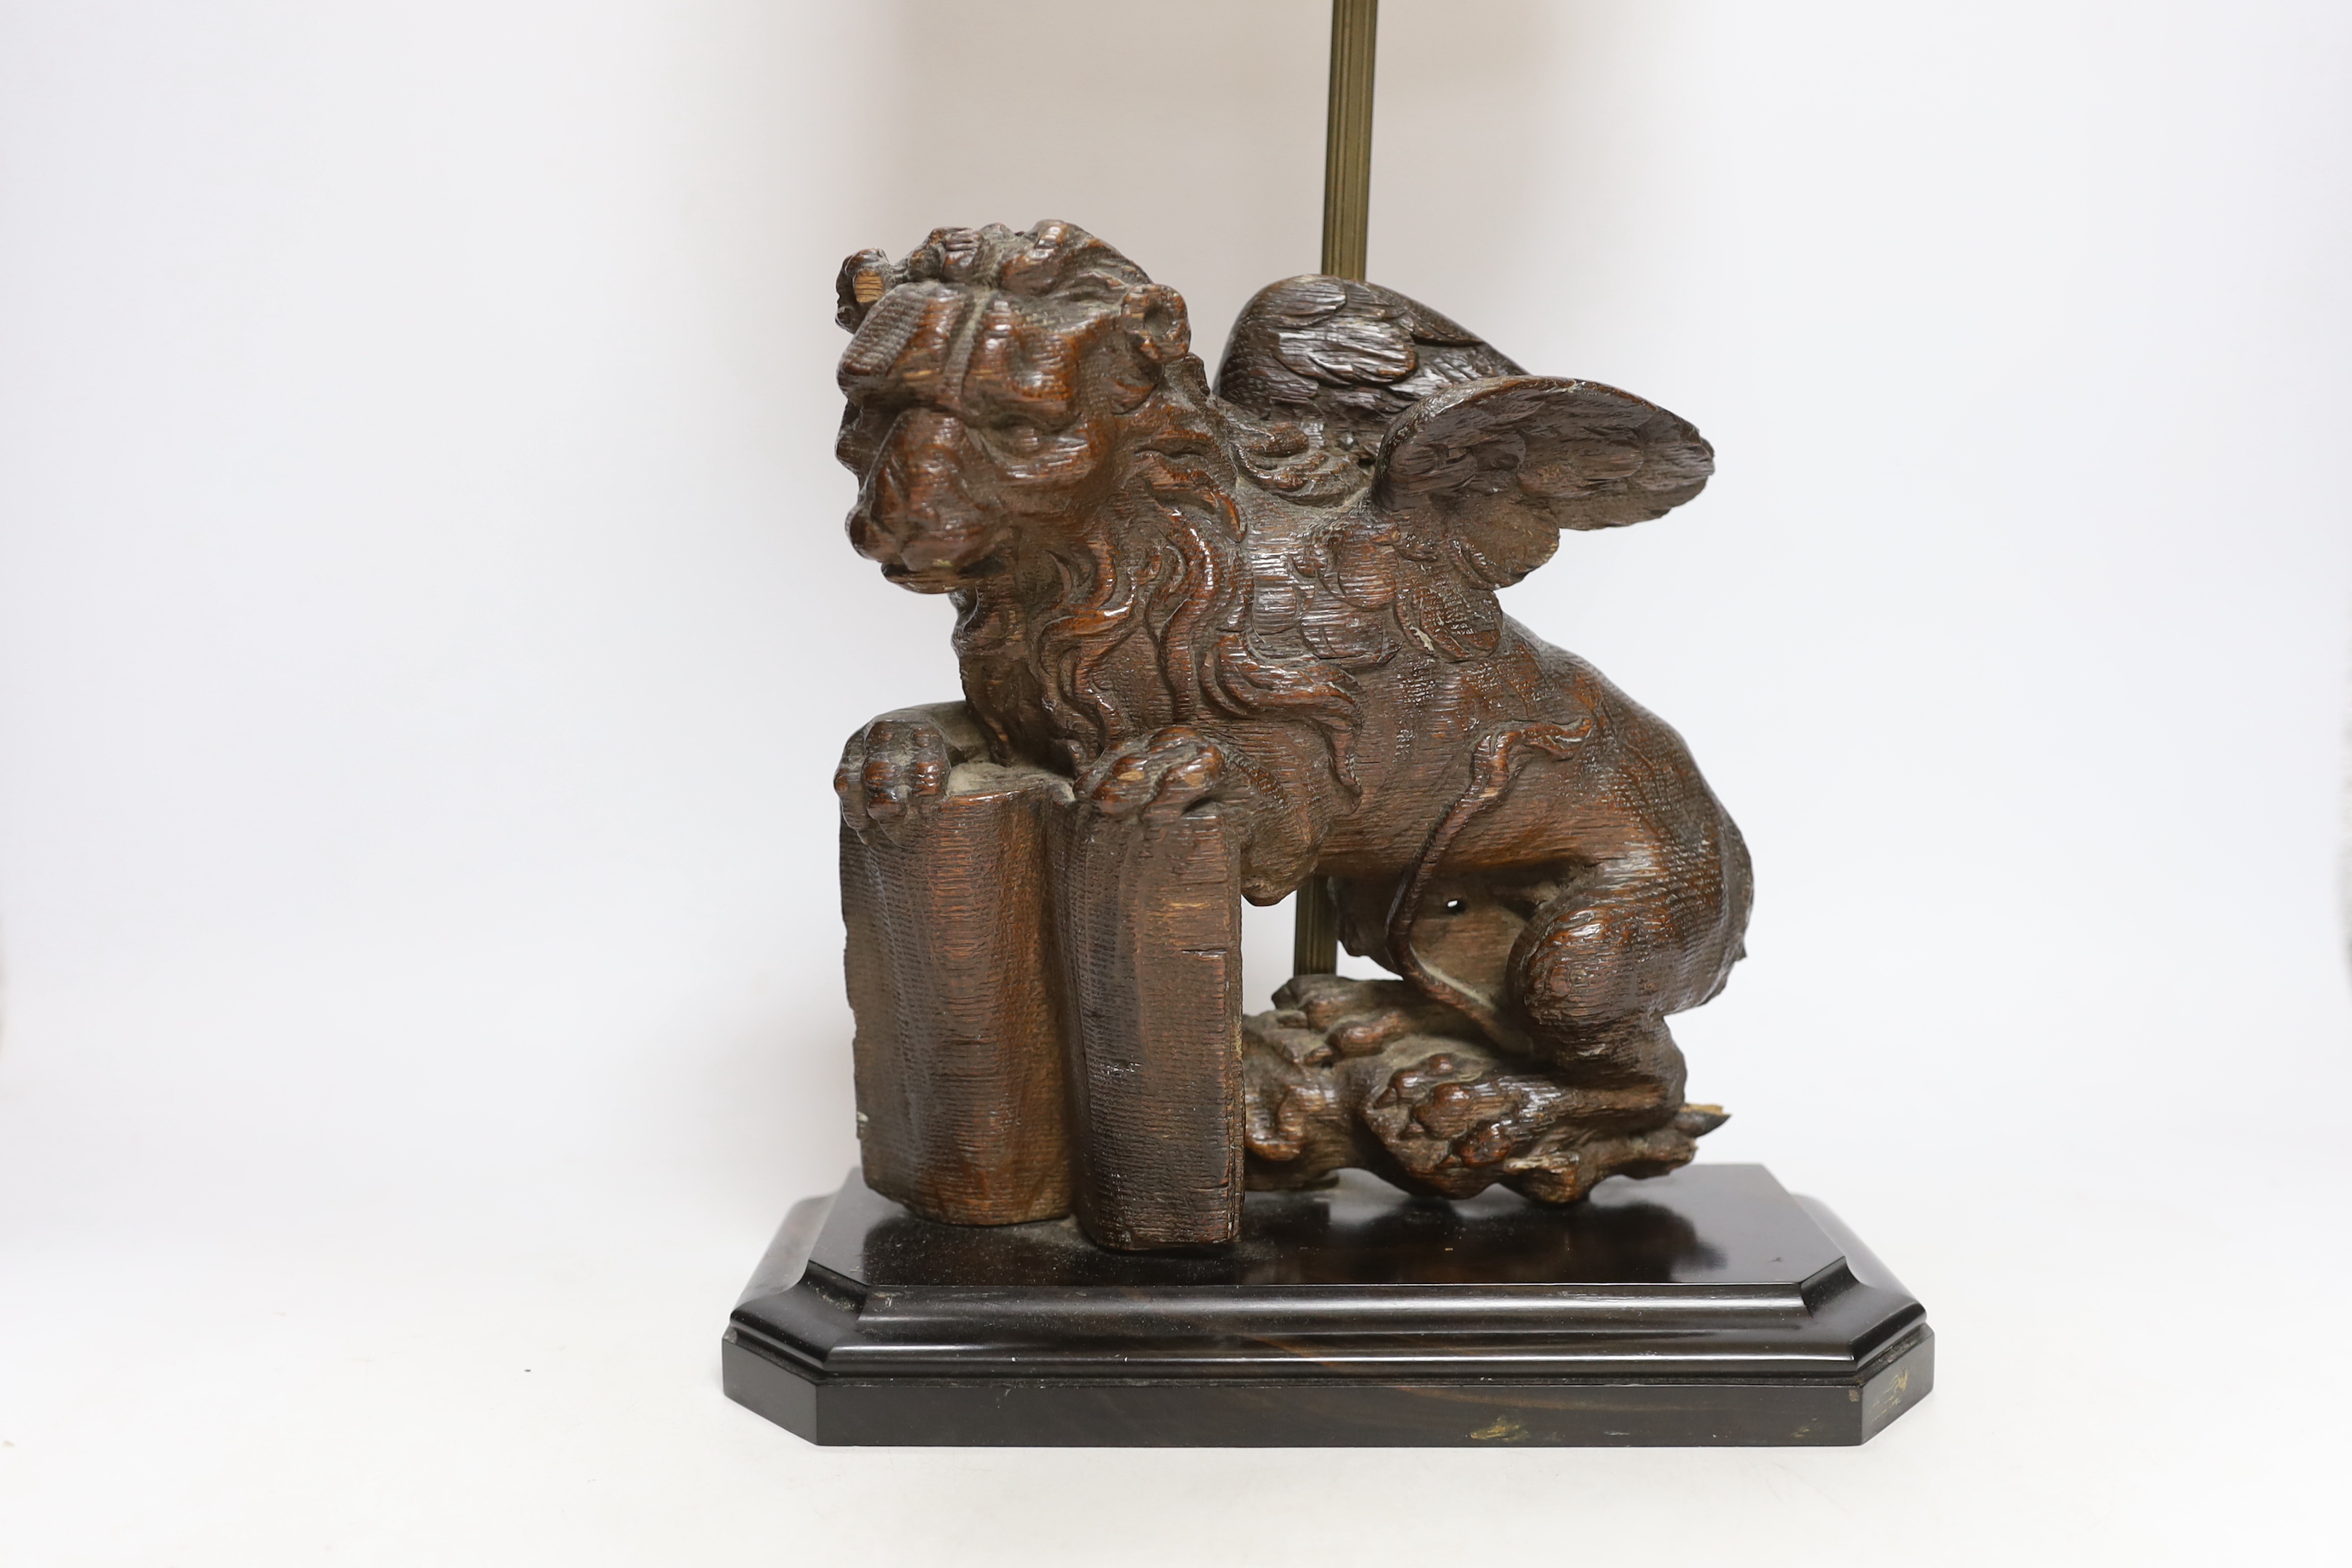 An 18th century oak carving of a Heraldic lion, now as a lamp, 55cm high including shade